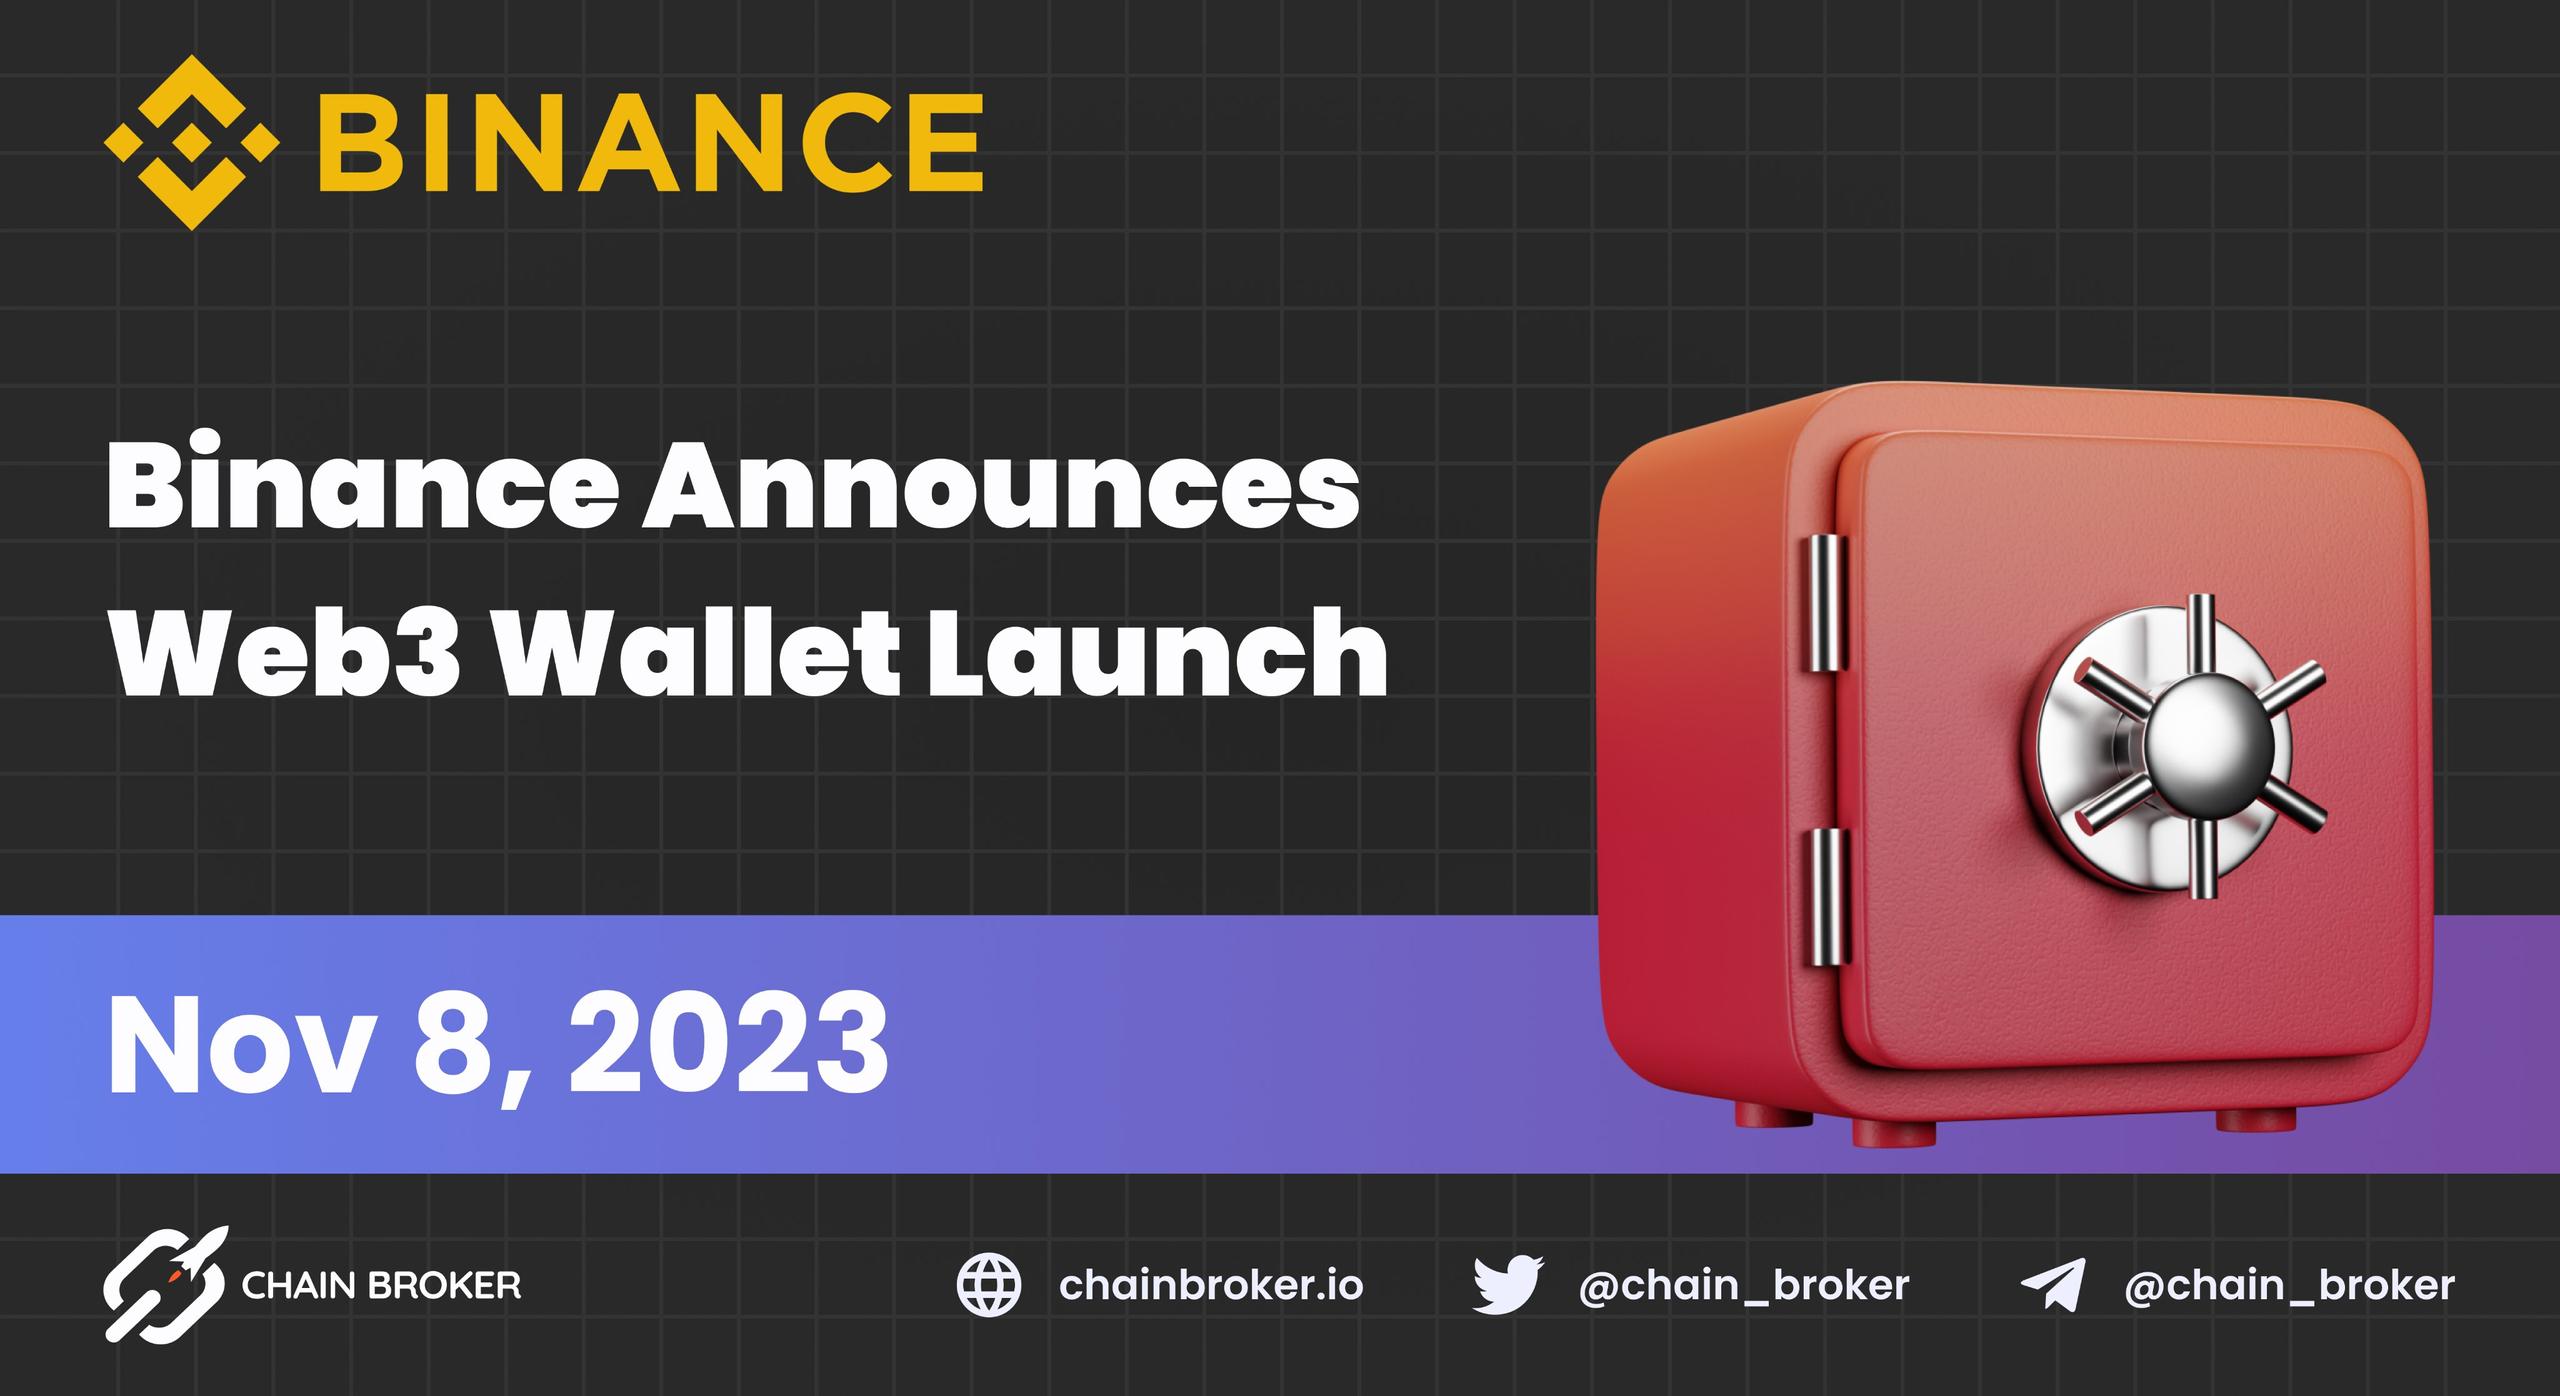 Binance Announces the Launch of Web3 Wallet